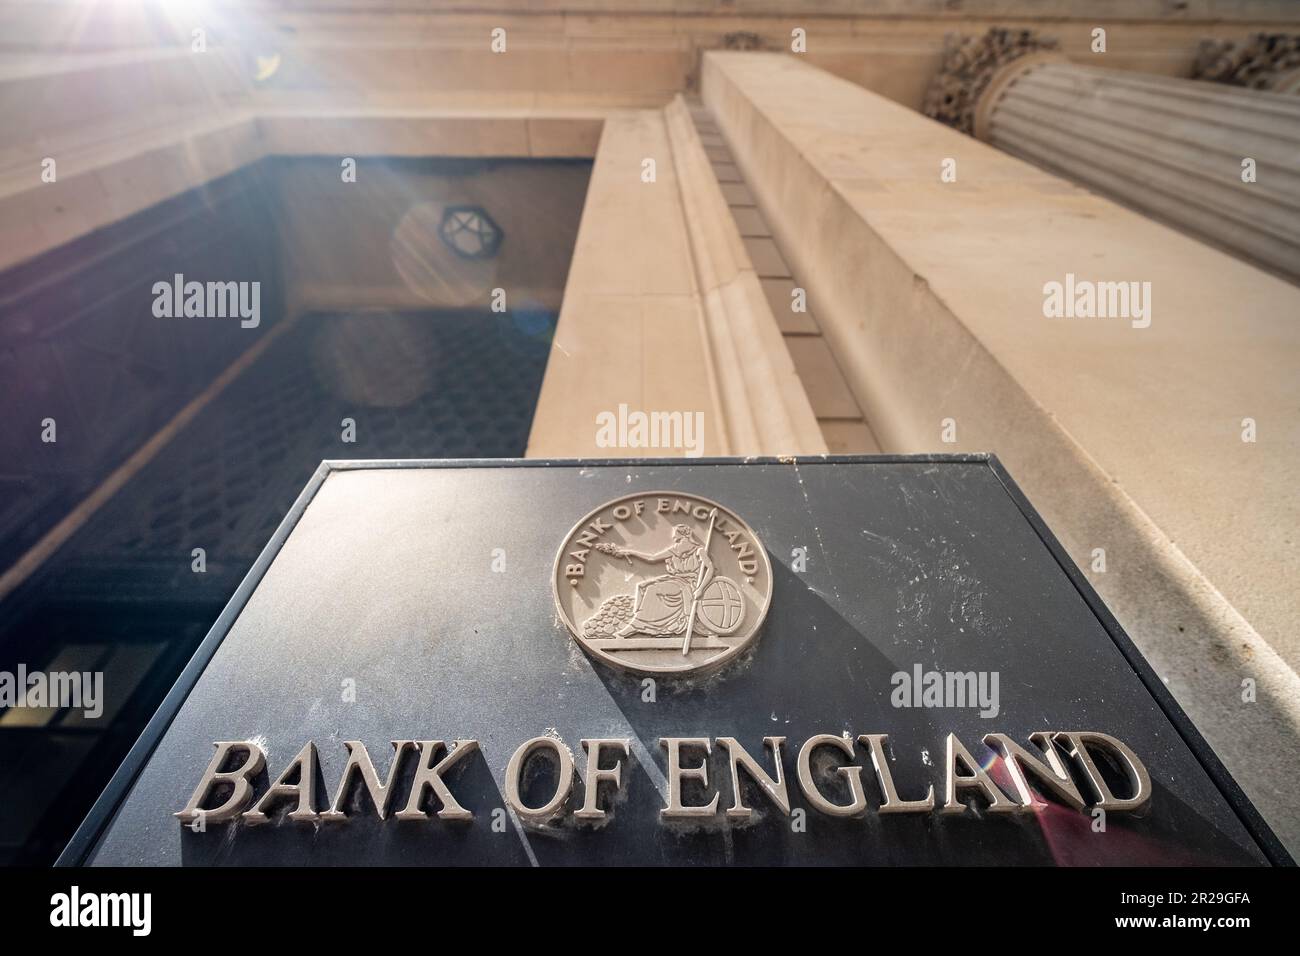 London- May 2023: Bank of England exterior sign in the City of London Stock Photo